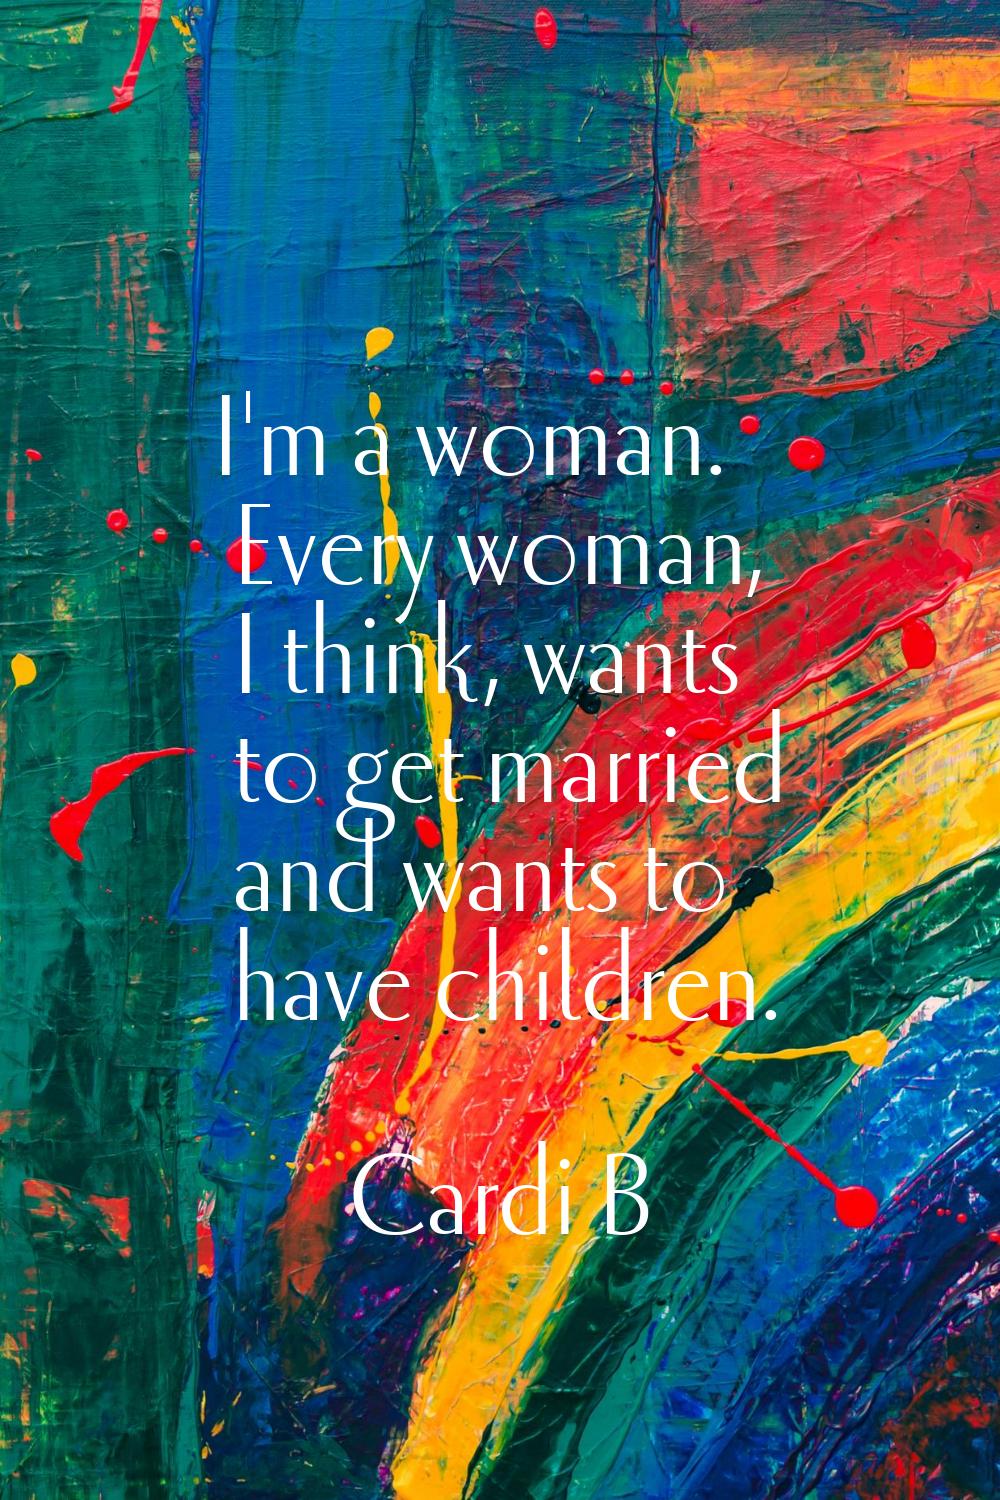 I'm a woman. Every woman, I think, wants to get married and wants to have children.